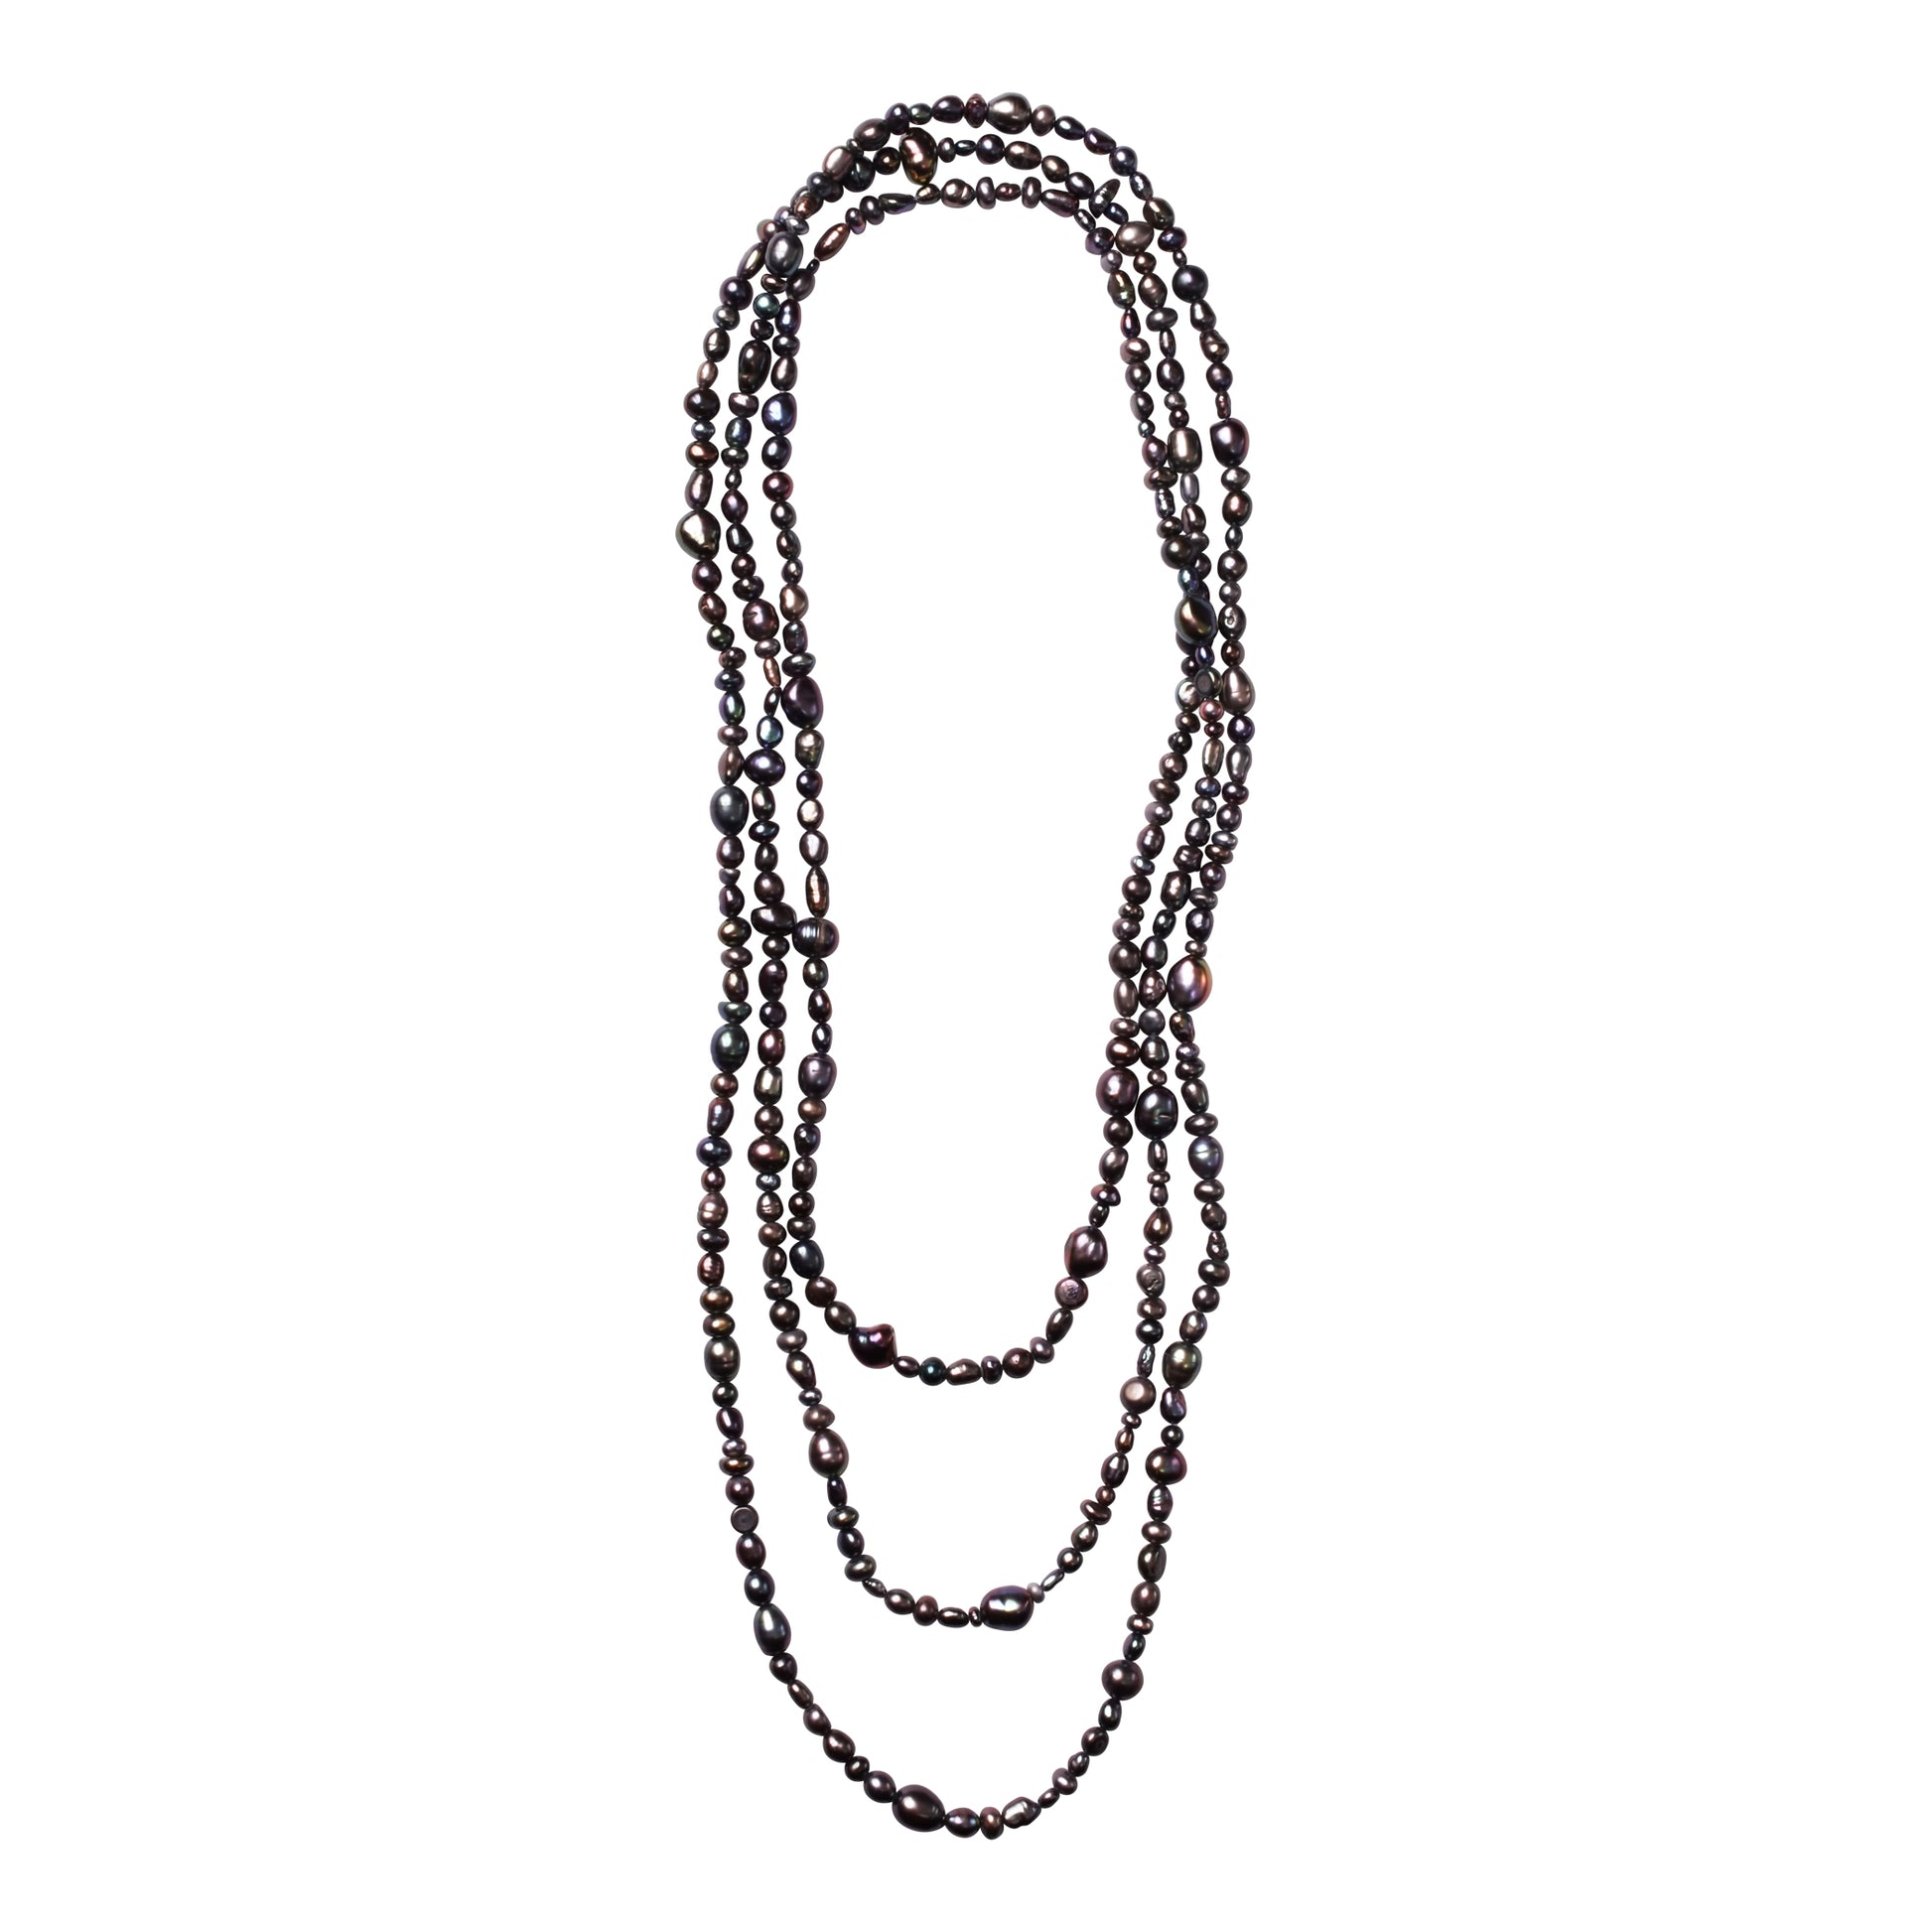 Misty Blue/Grey Freshwater Pearl Rope Necklace 72"